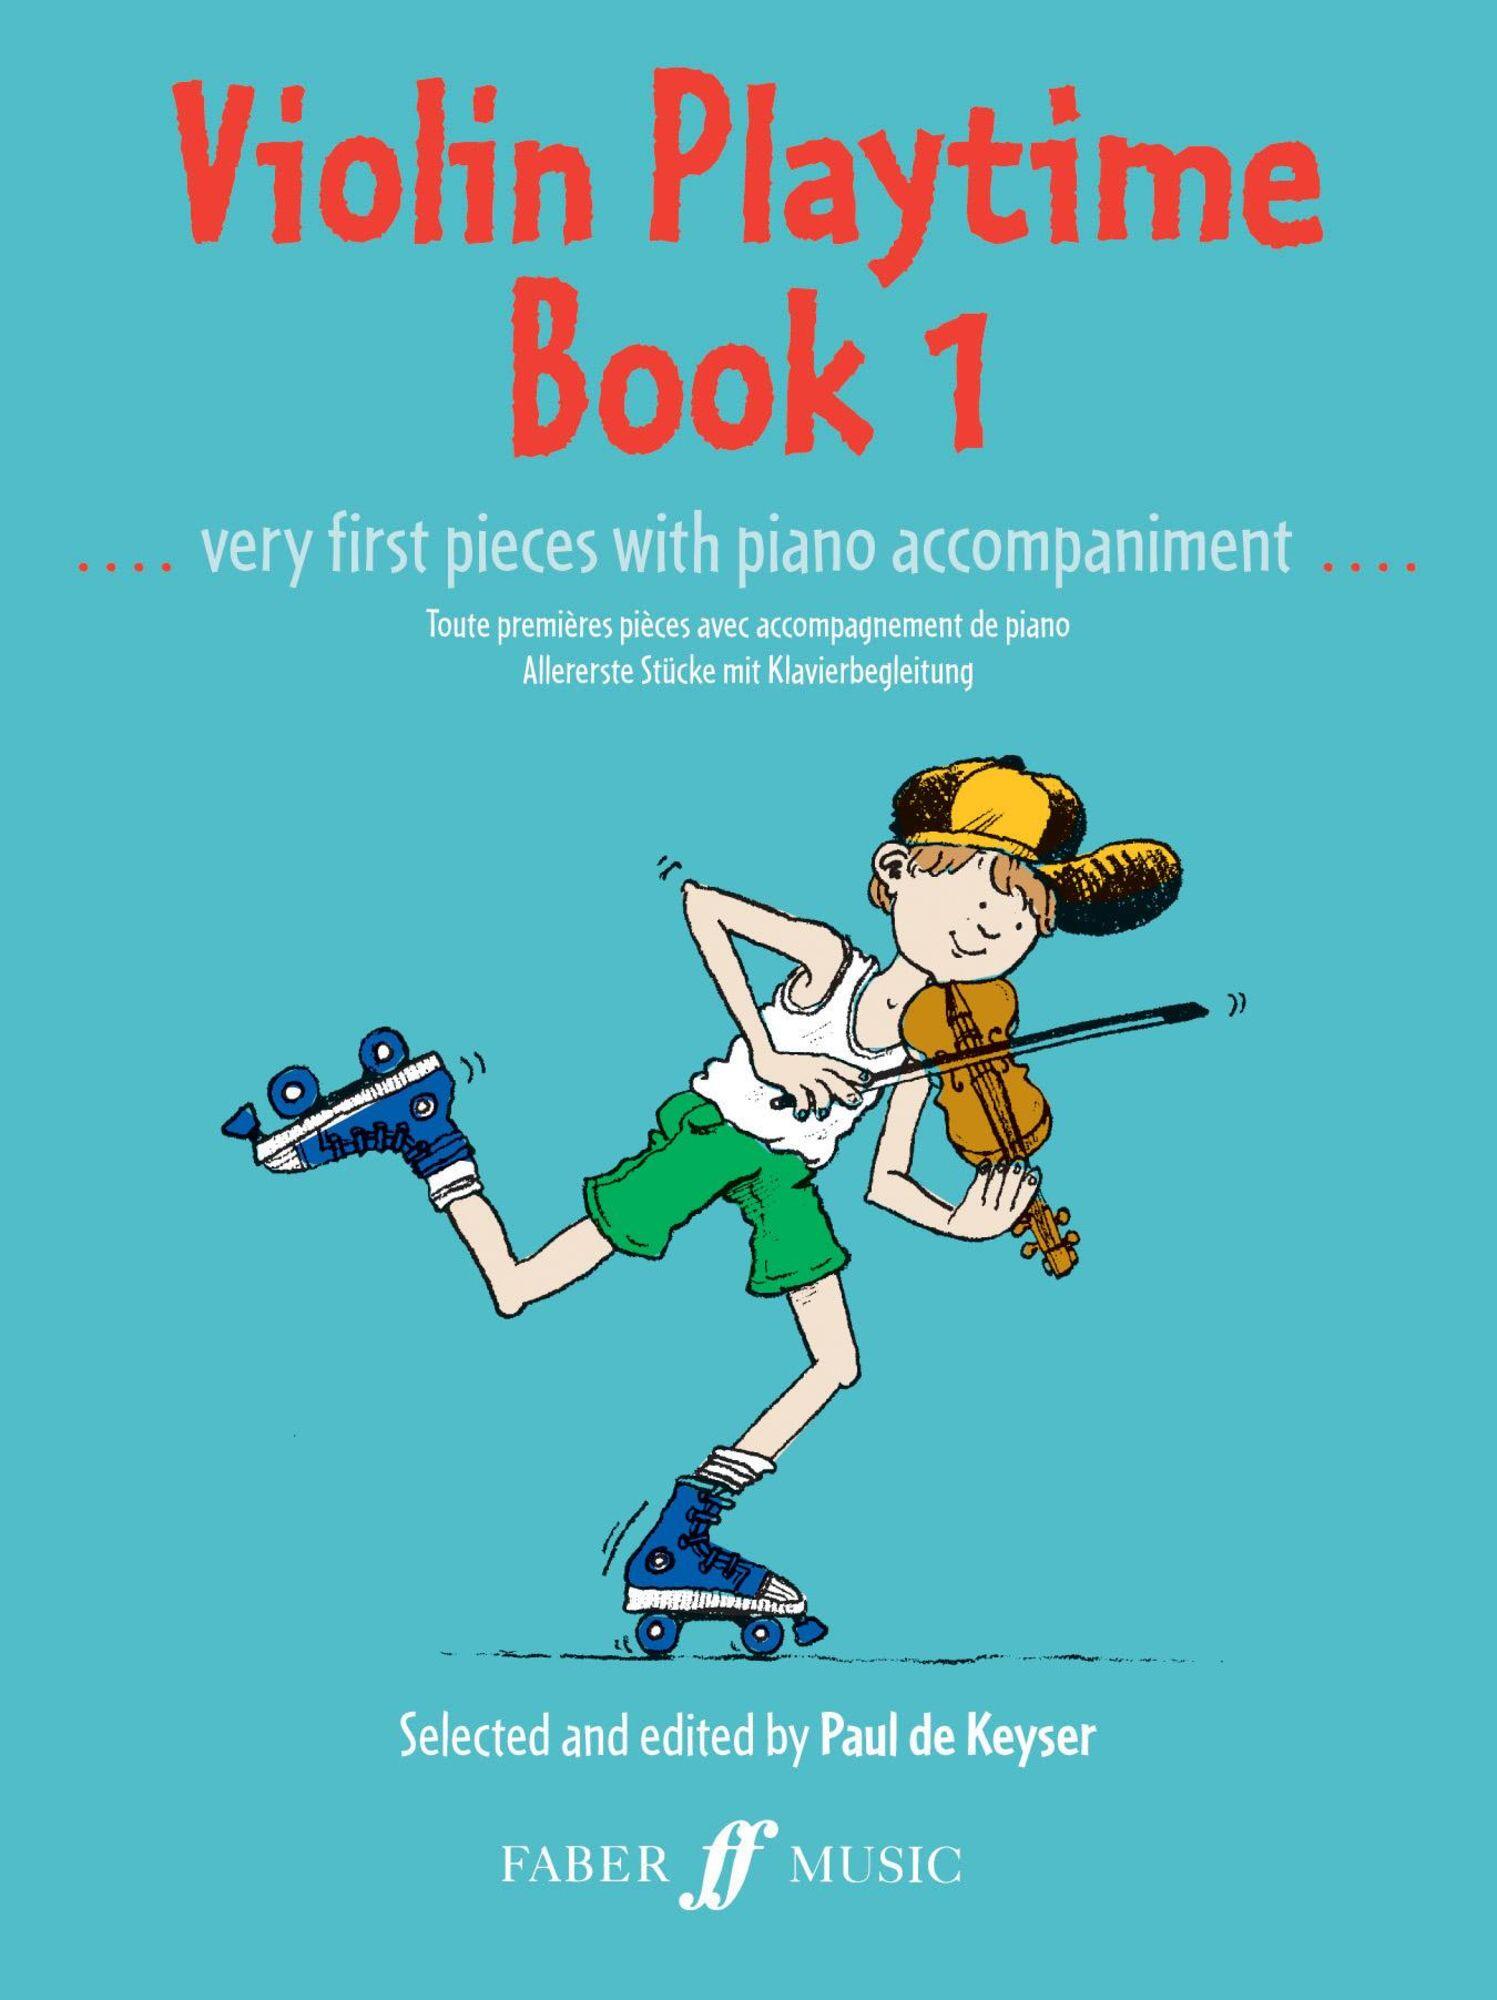 Faber Music Violin Playtime Book 1 : photo 1